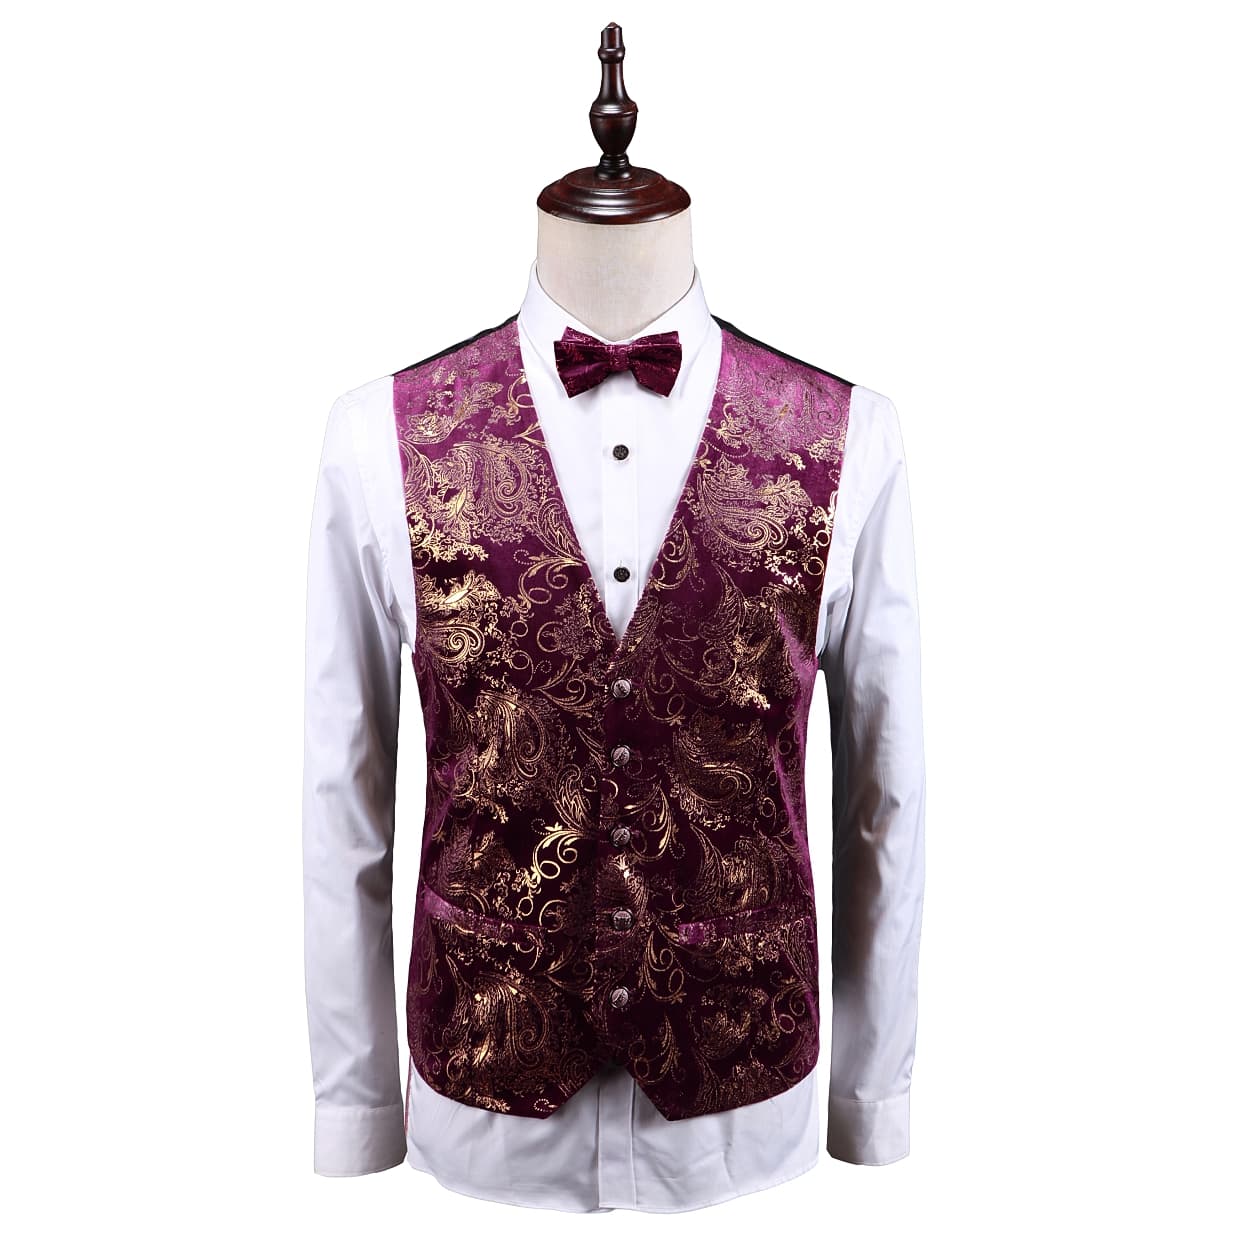 Mens Single Breasted Stylish Floral Pattern Vest Printed Slim Fit Waistcoat For Prom Groomsman Wedding Party